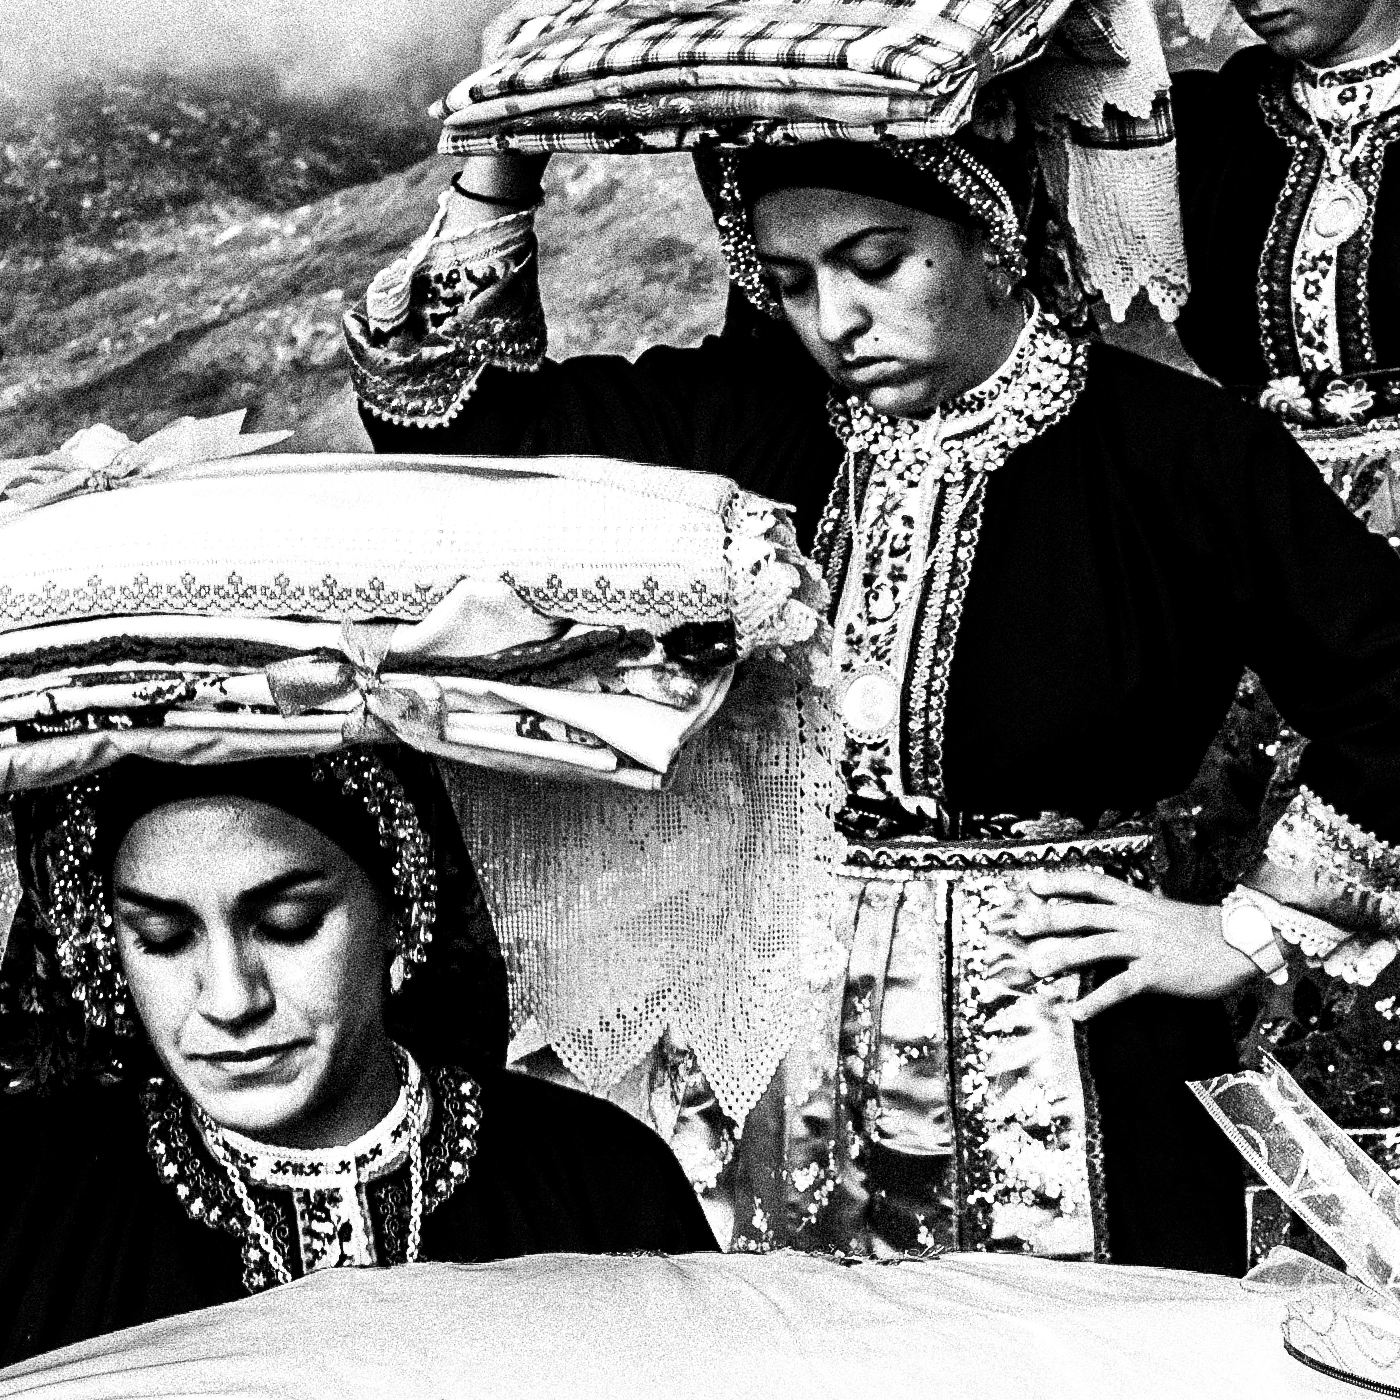 Black and White Photography Wall Art Greece | Dowry in Olympos Karpathos Dodecanese by George Tatakis - detailed view